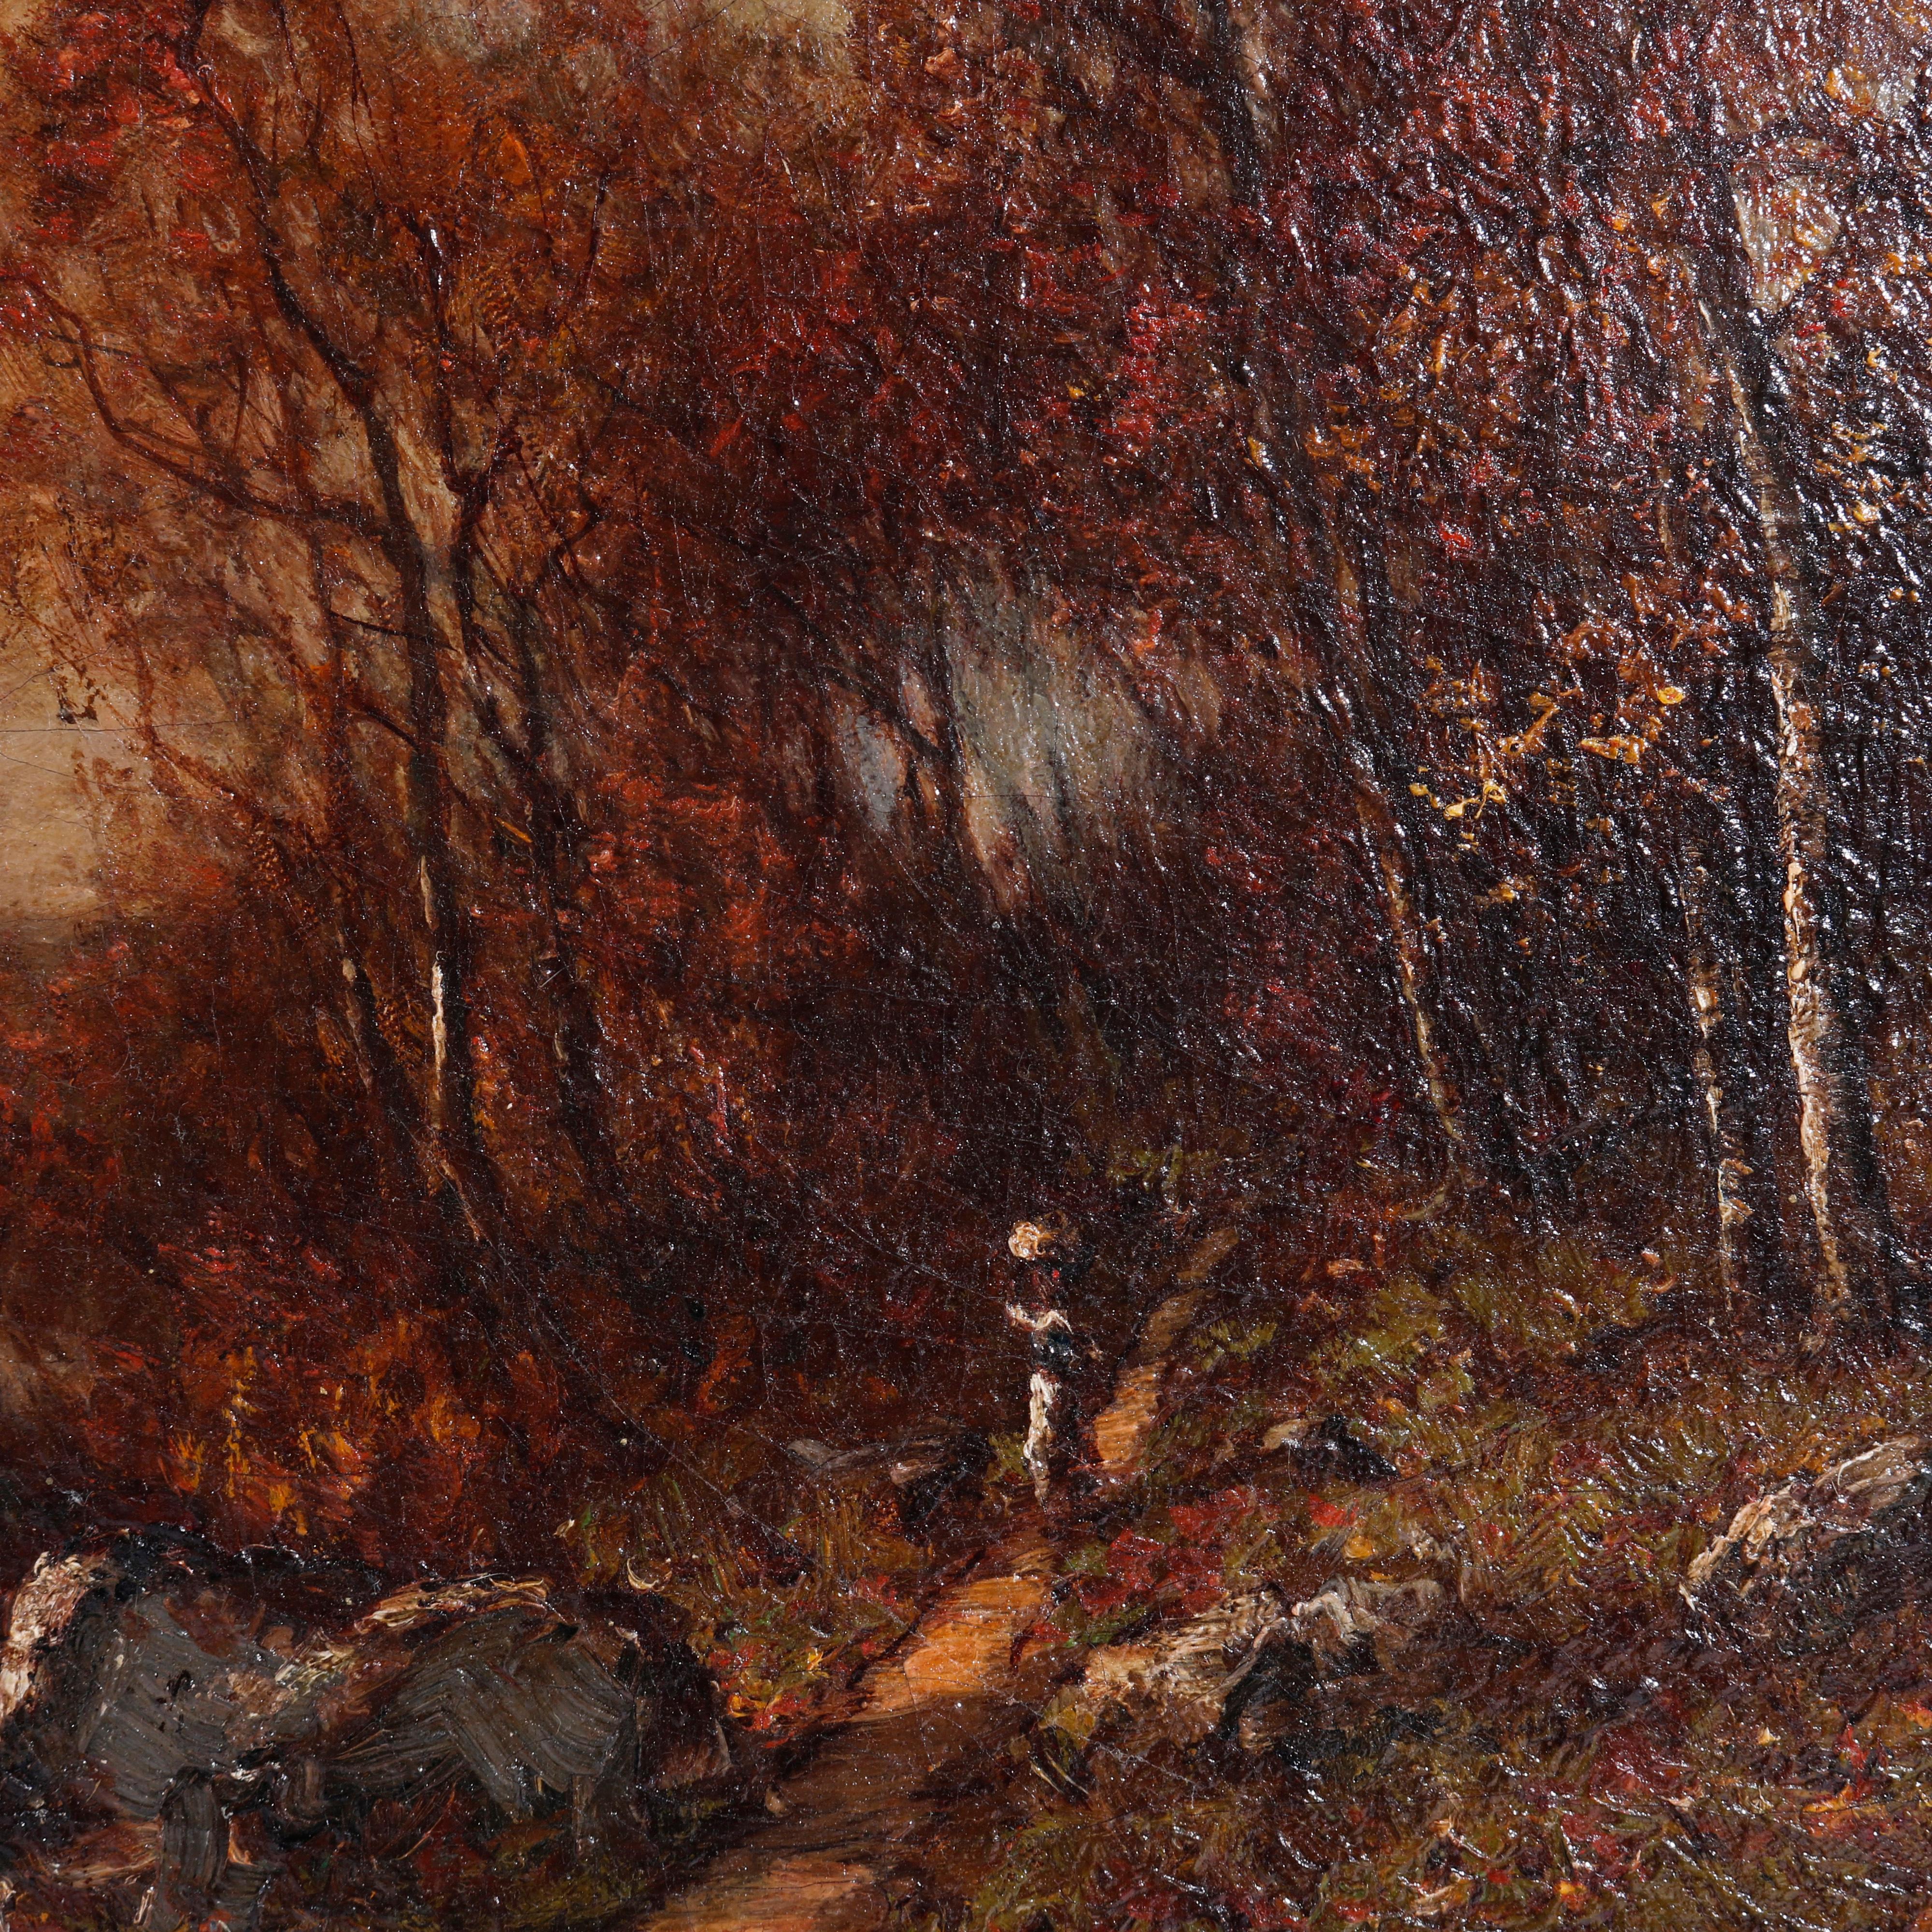 Hand-Painted Antique Landscape Painting, Autumn on the Patomac River, Signed Max Weyl, 19thC